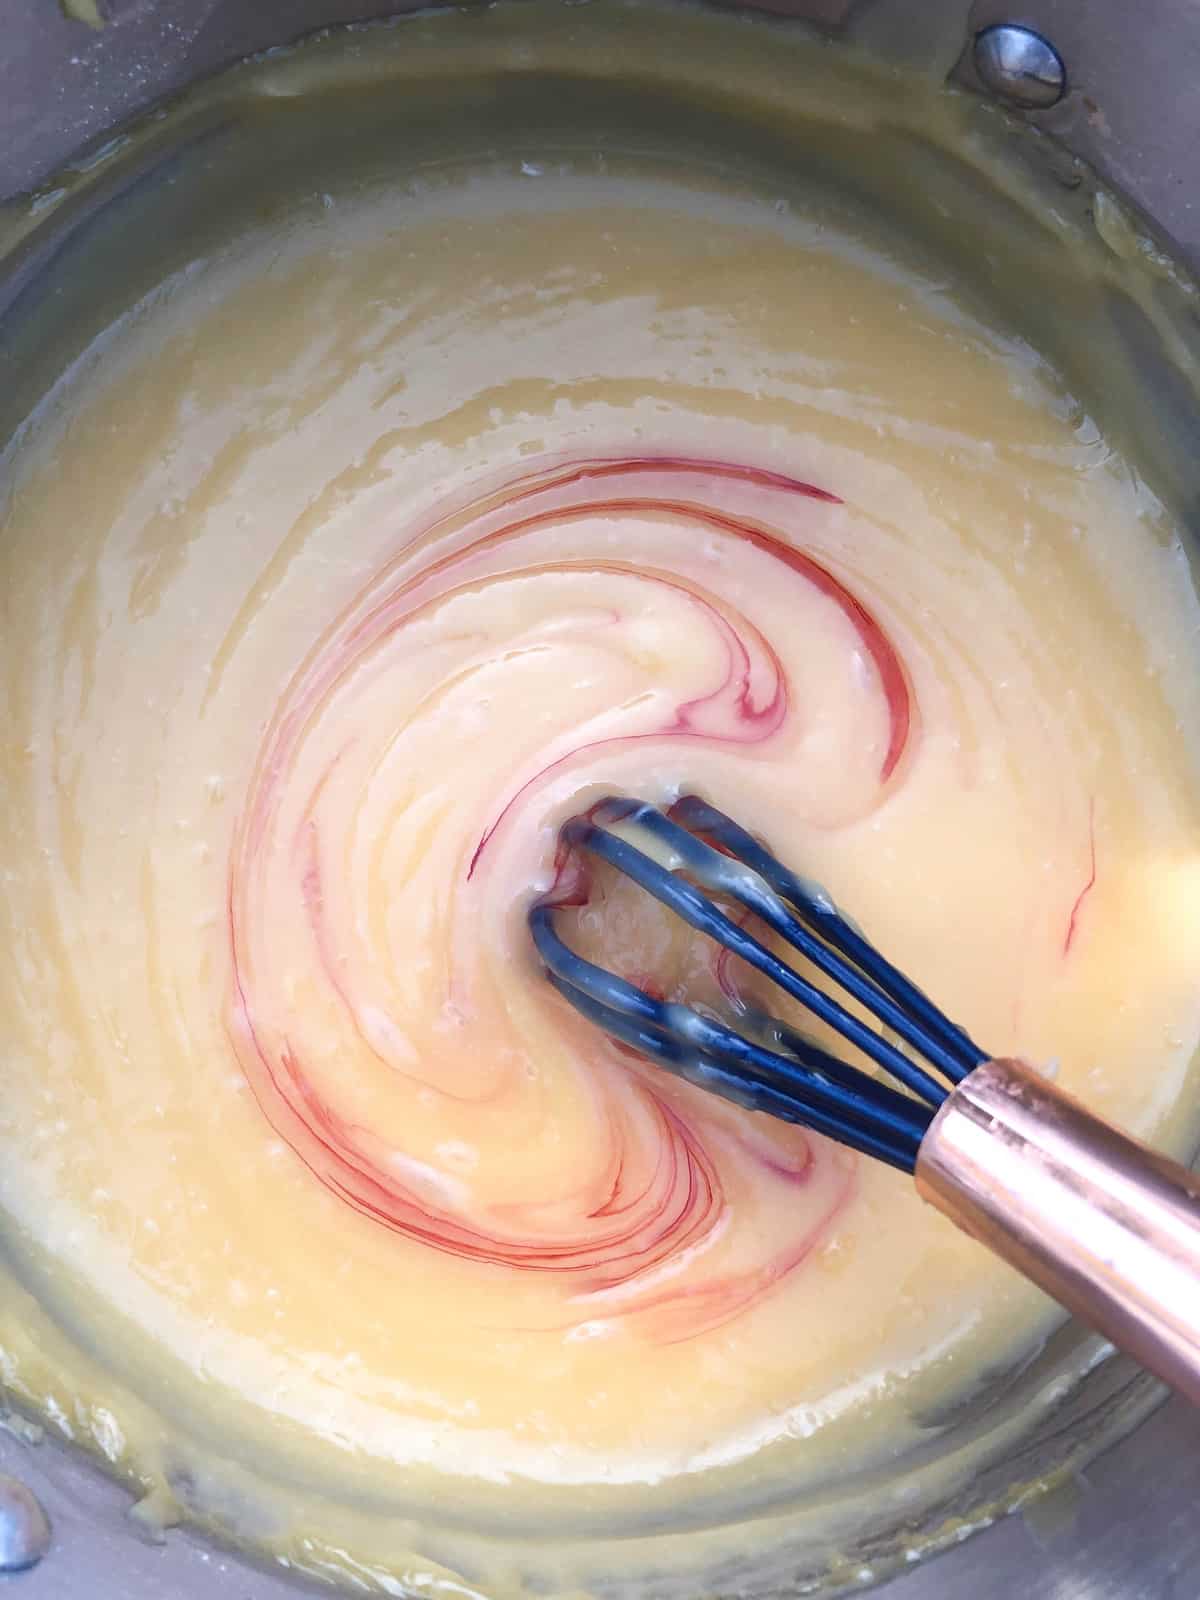 Add red food coloring to make the curd look more grapefruit colored